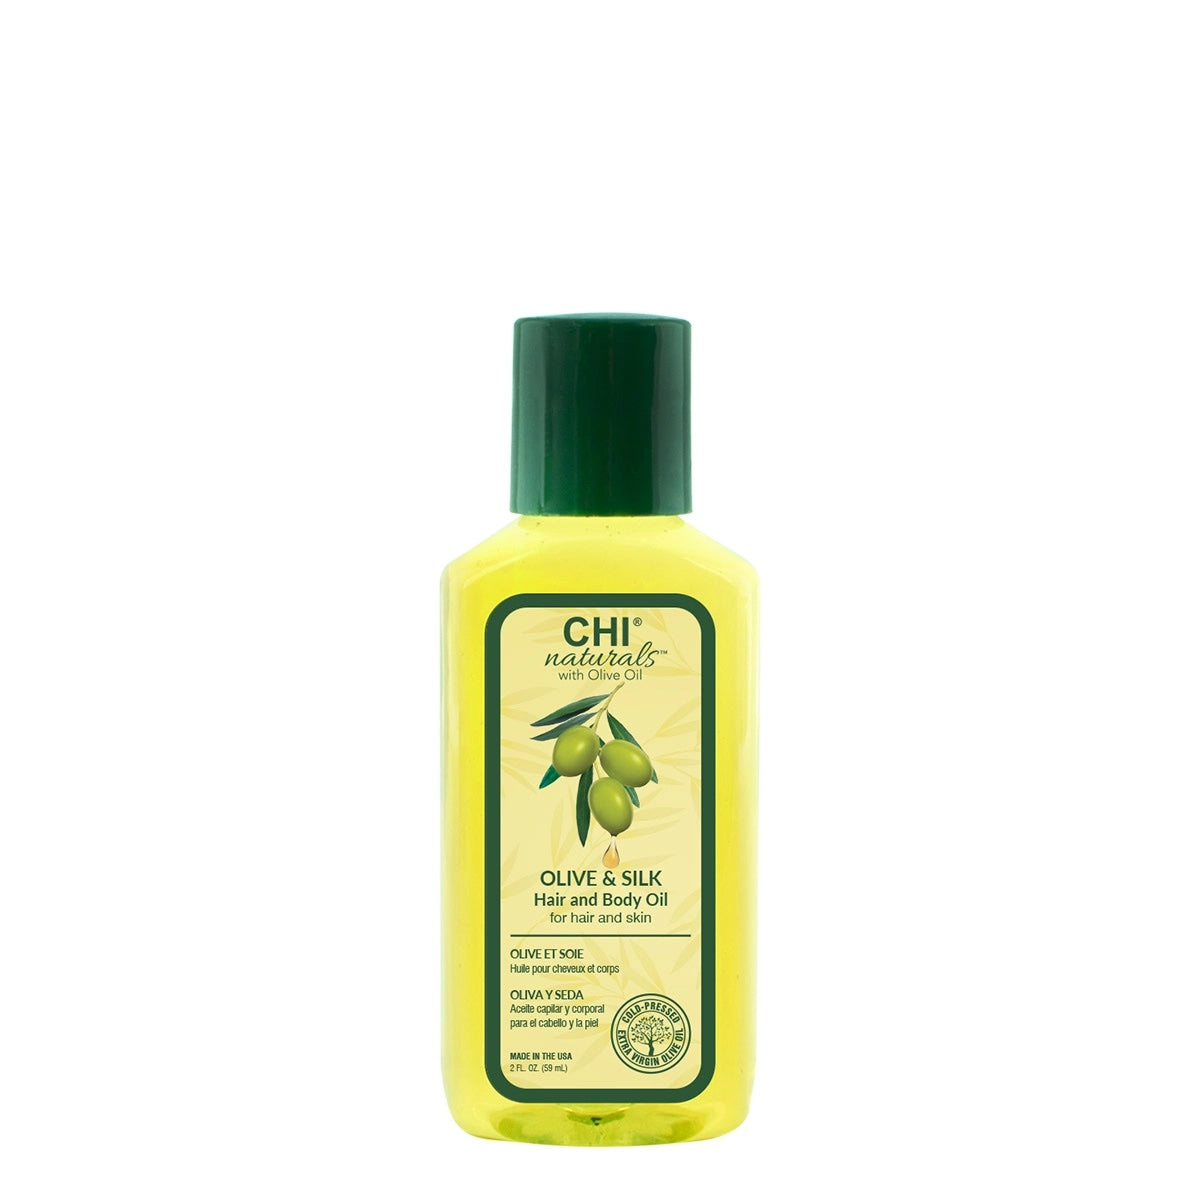 Chi Naturals with Olive Oil Olive & Silk Hair and Body Oil 59ml